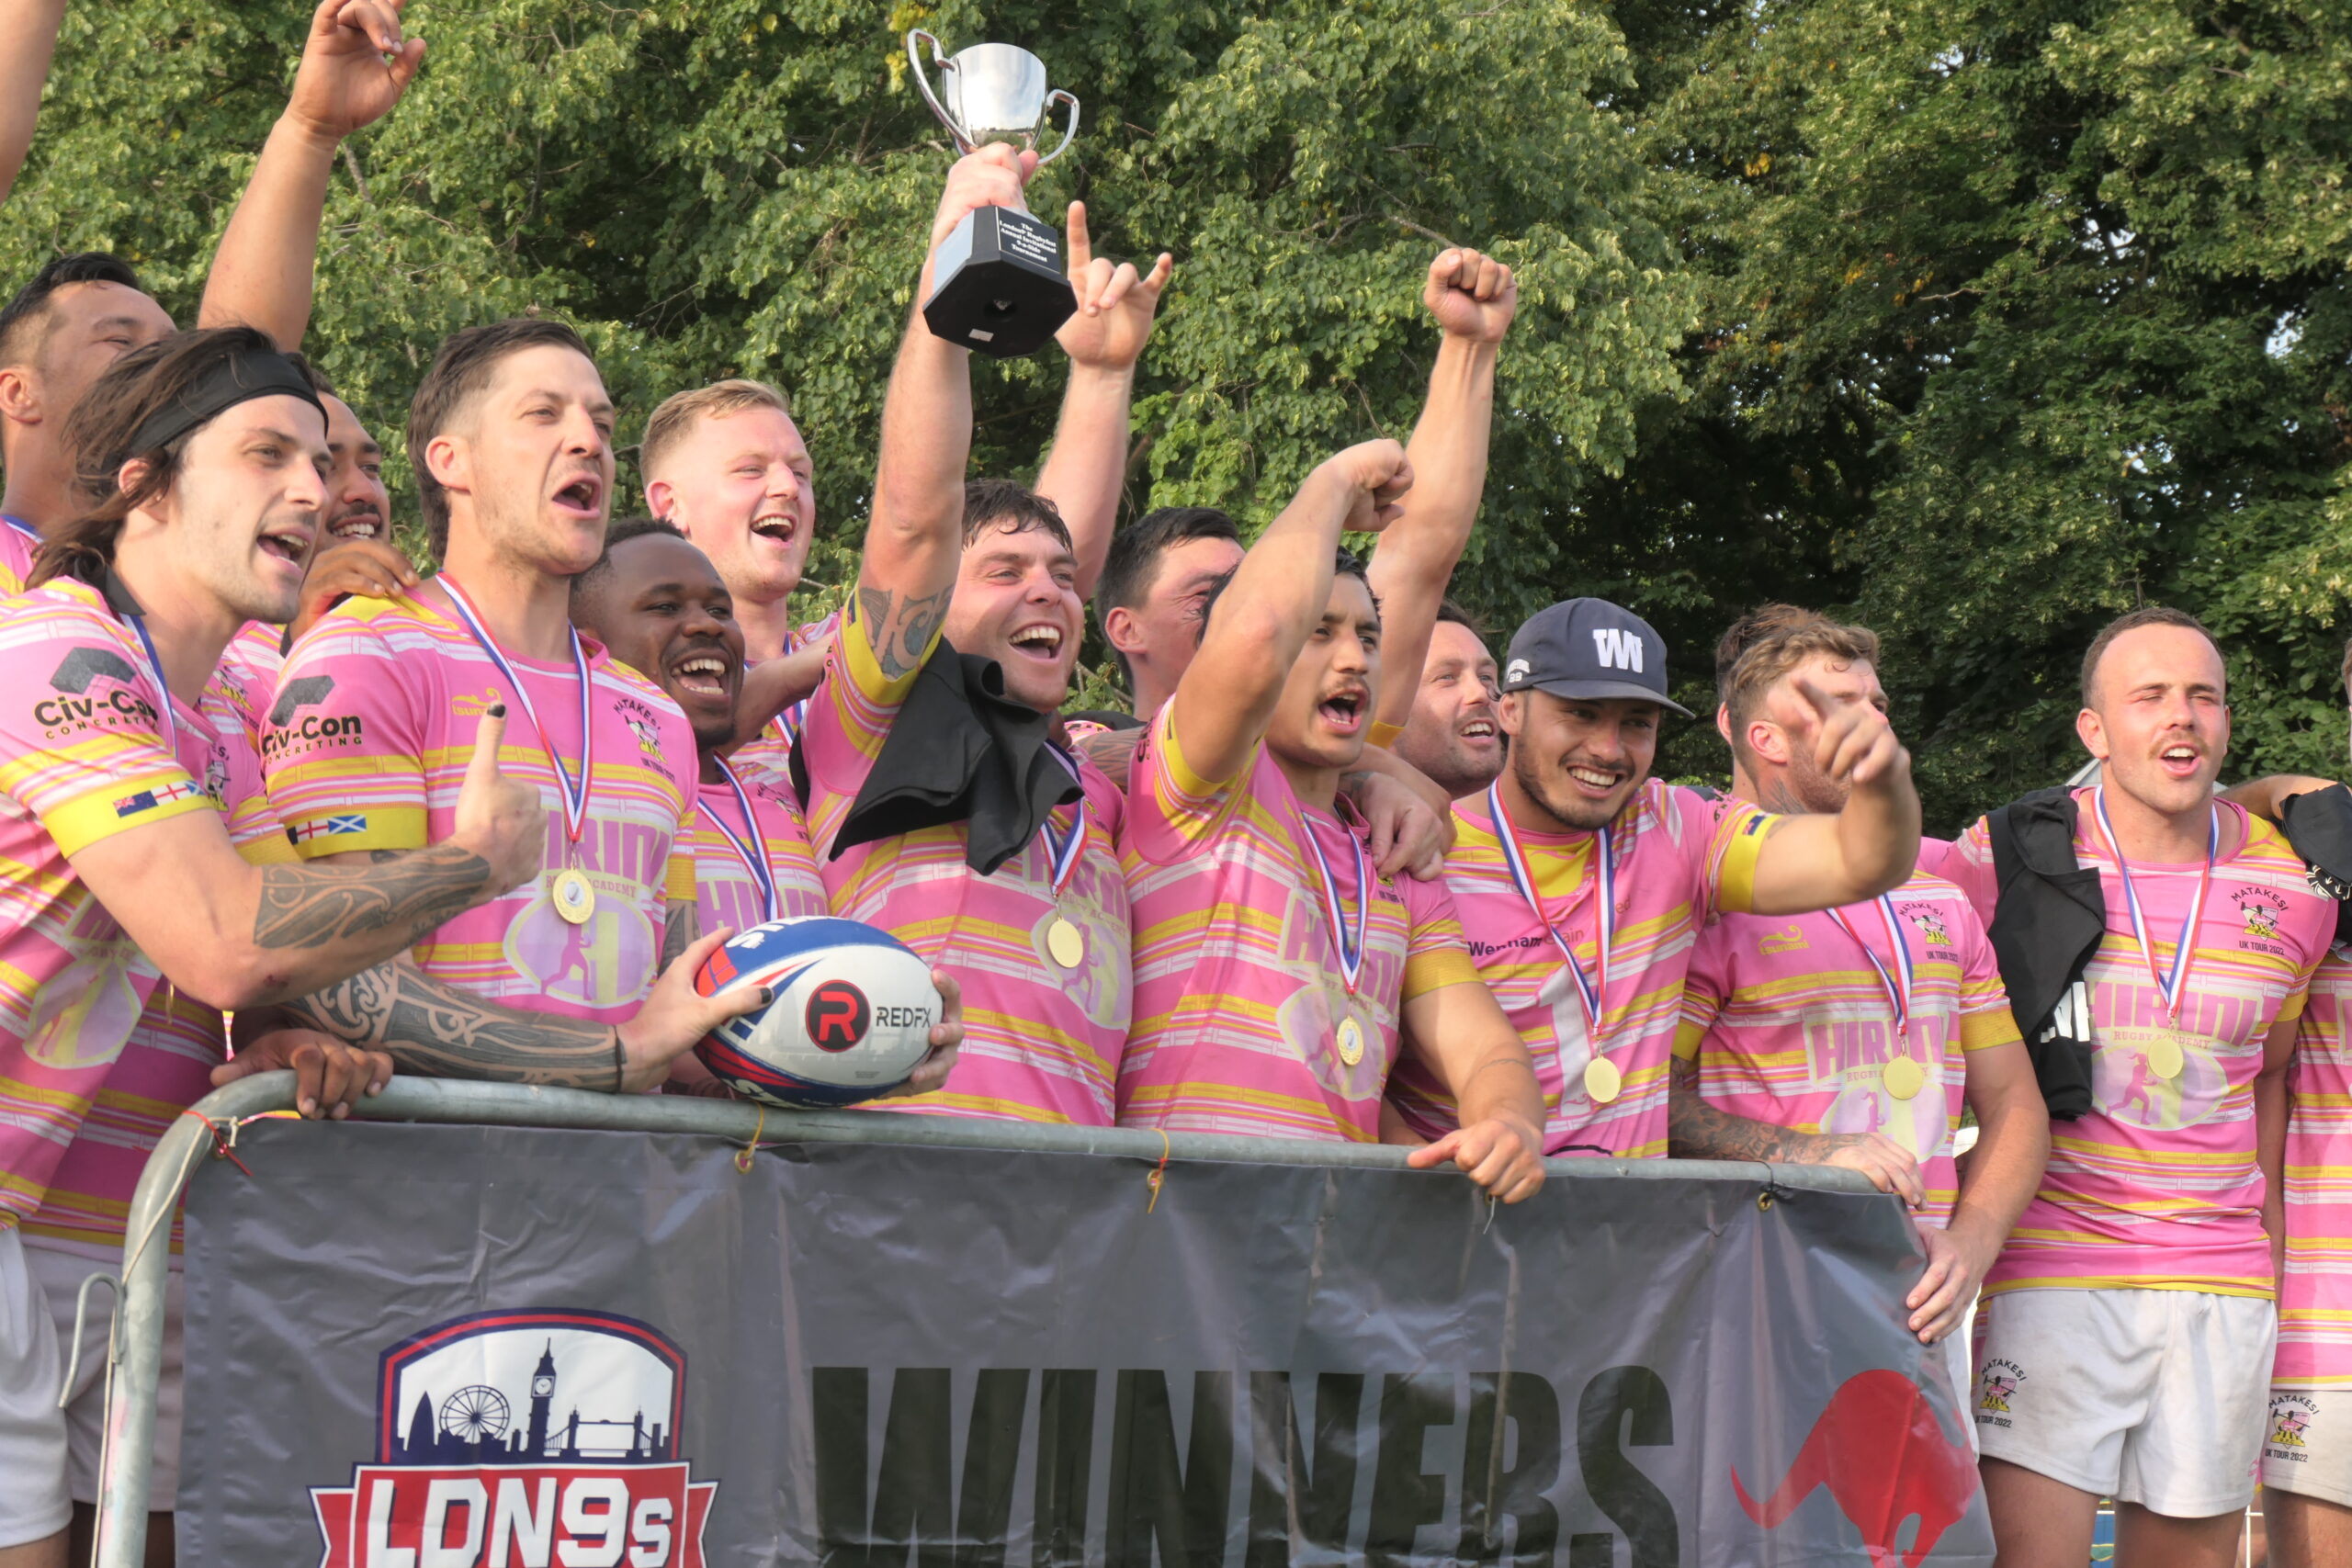 “Bunch of boys from Papamoa” win London Nines in first go at rugby league